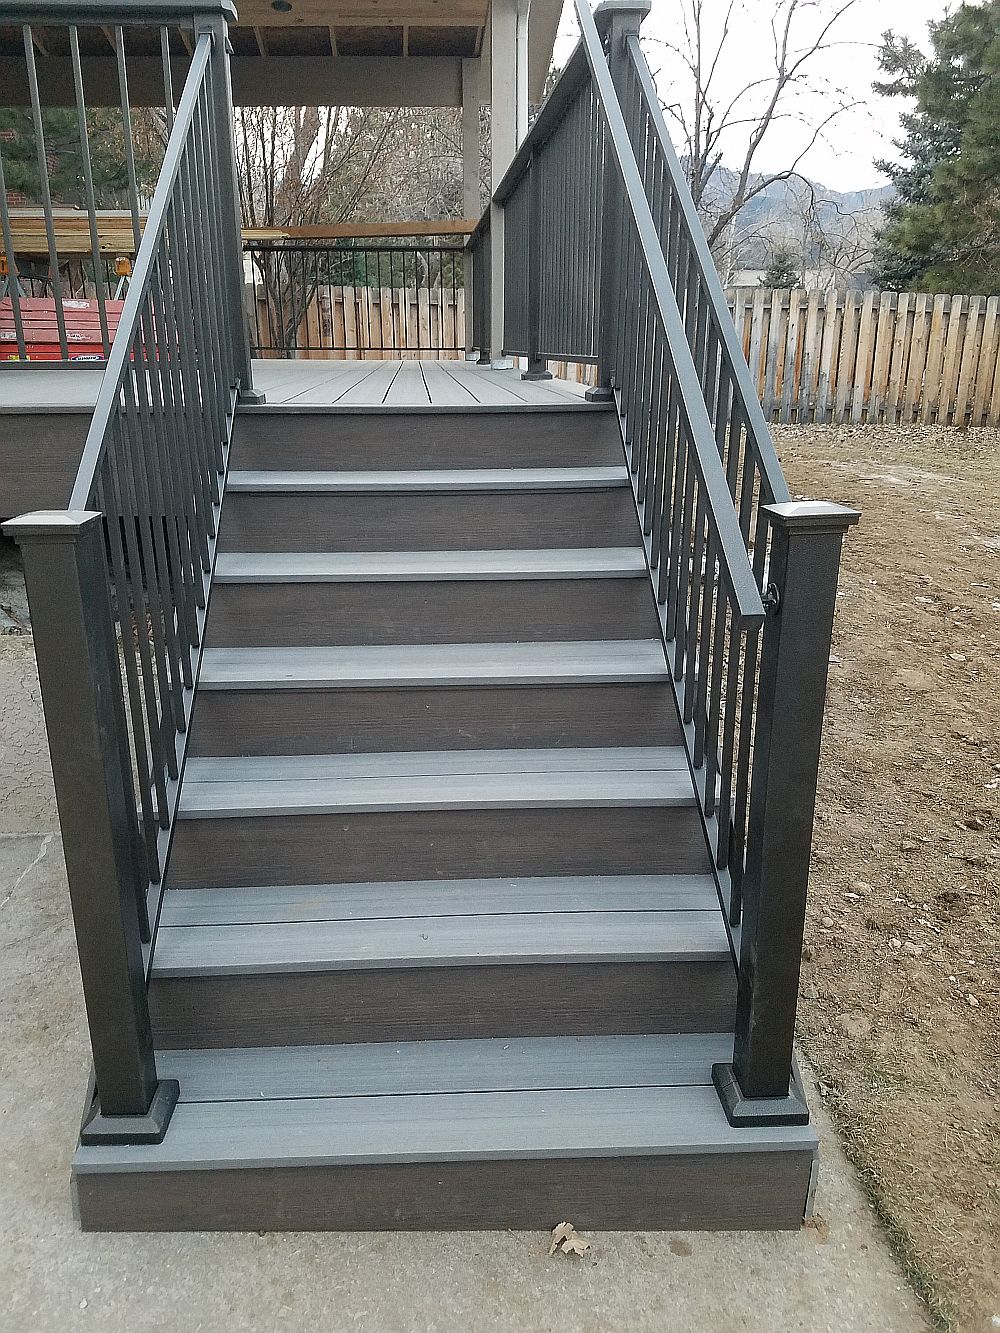 Composite deck stairs with metal panel railing and handrail